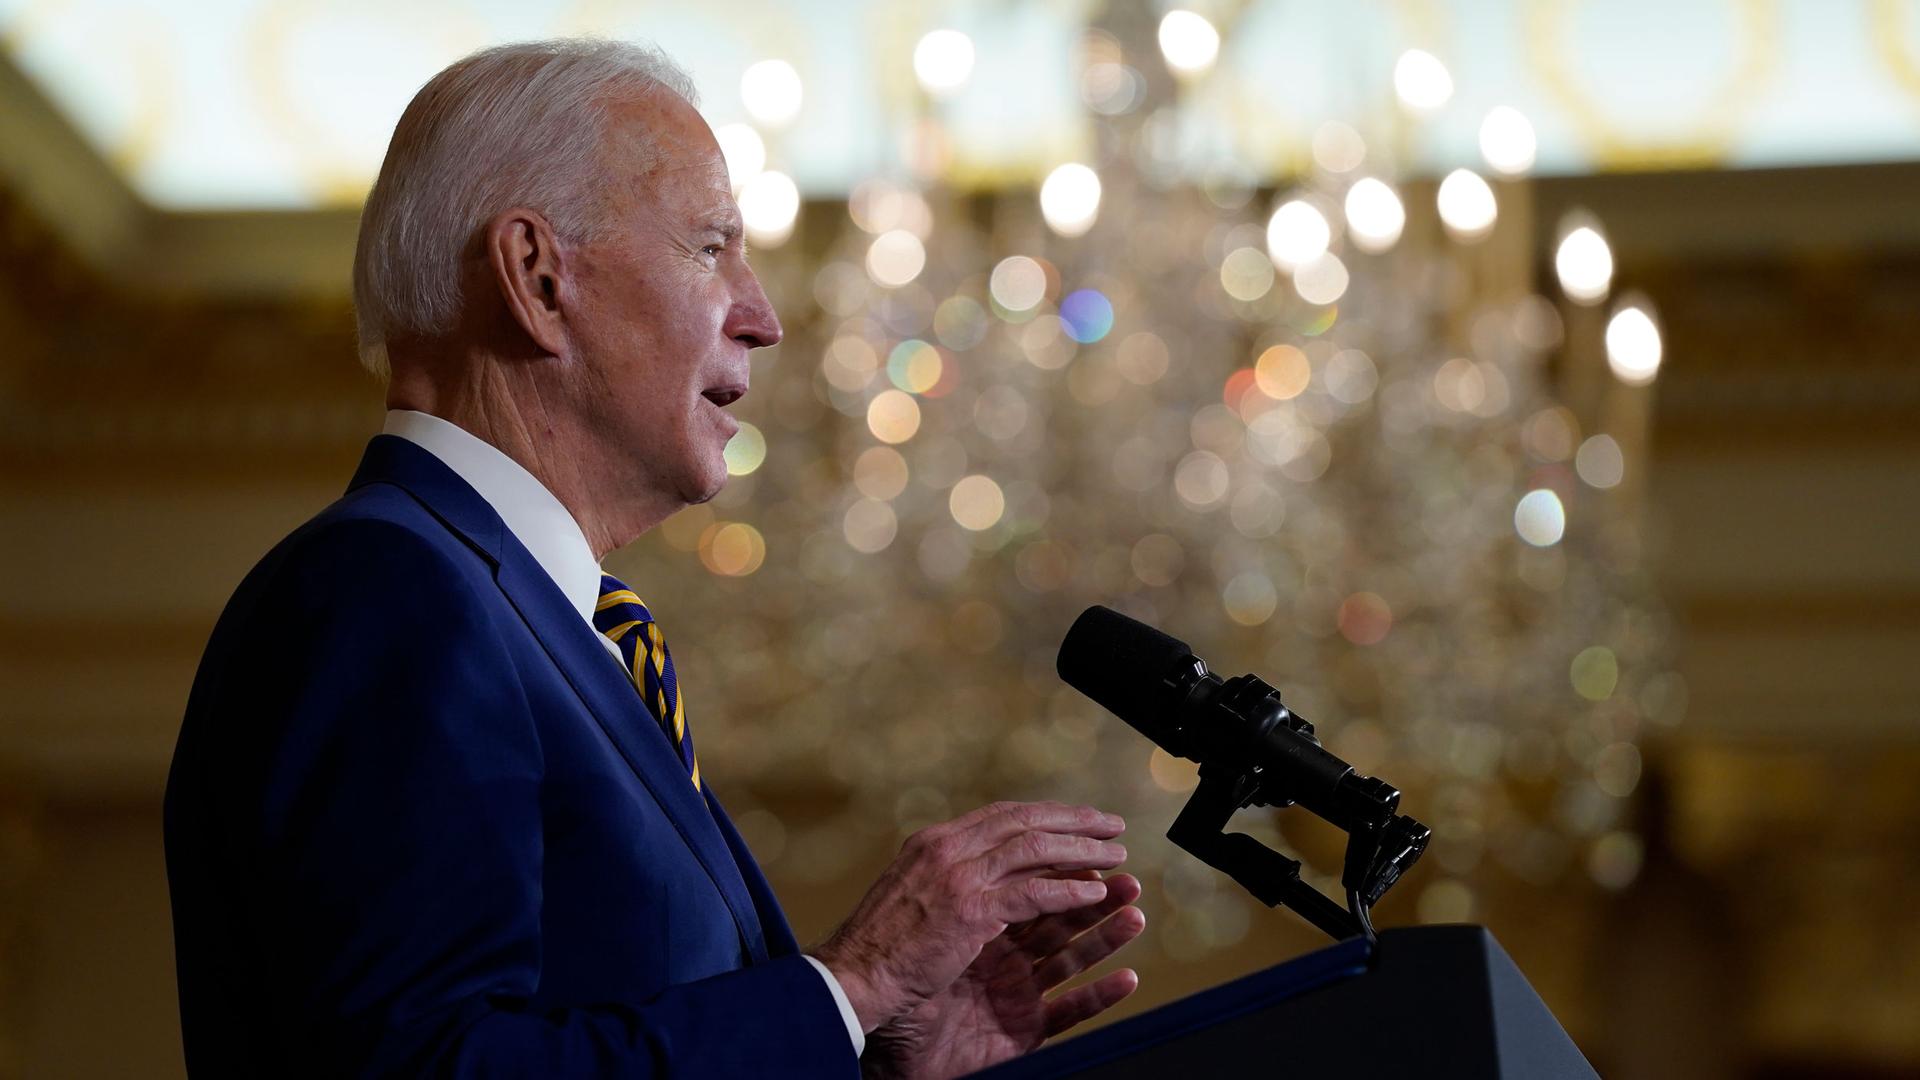 President Joe Biden is shown in profile speaking at a podium with microphones and wearing a blue suit.